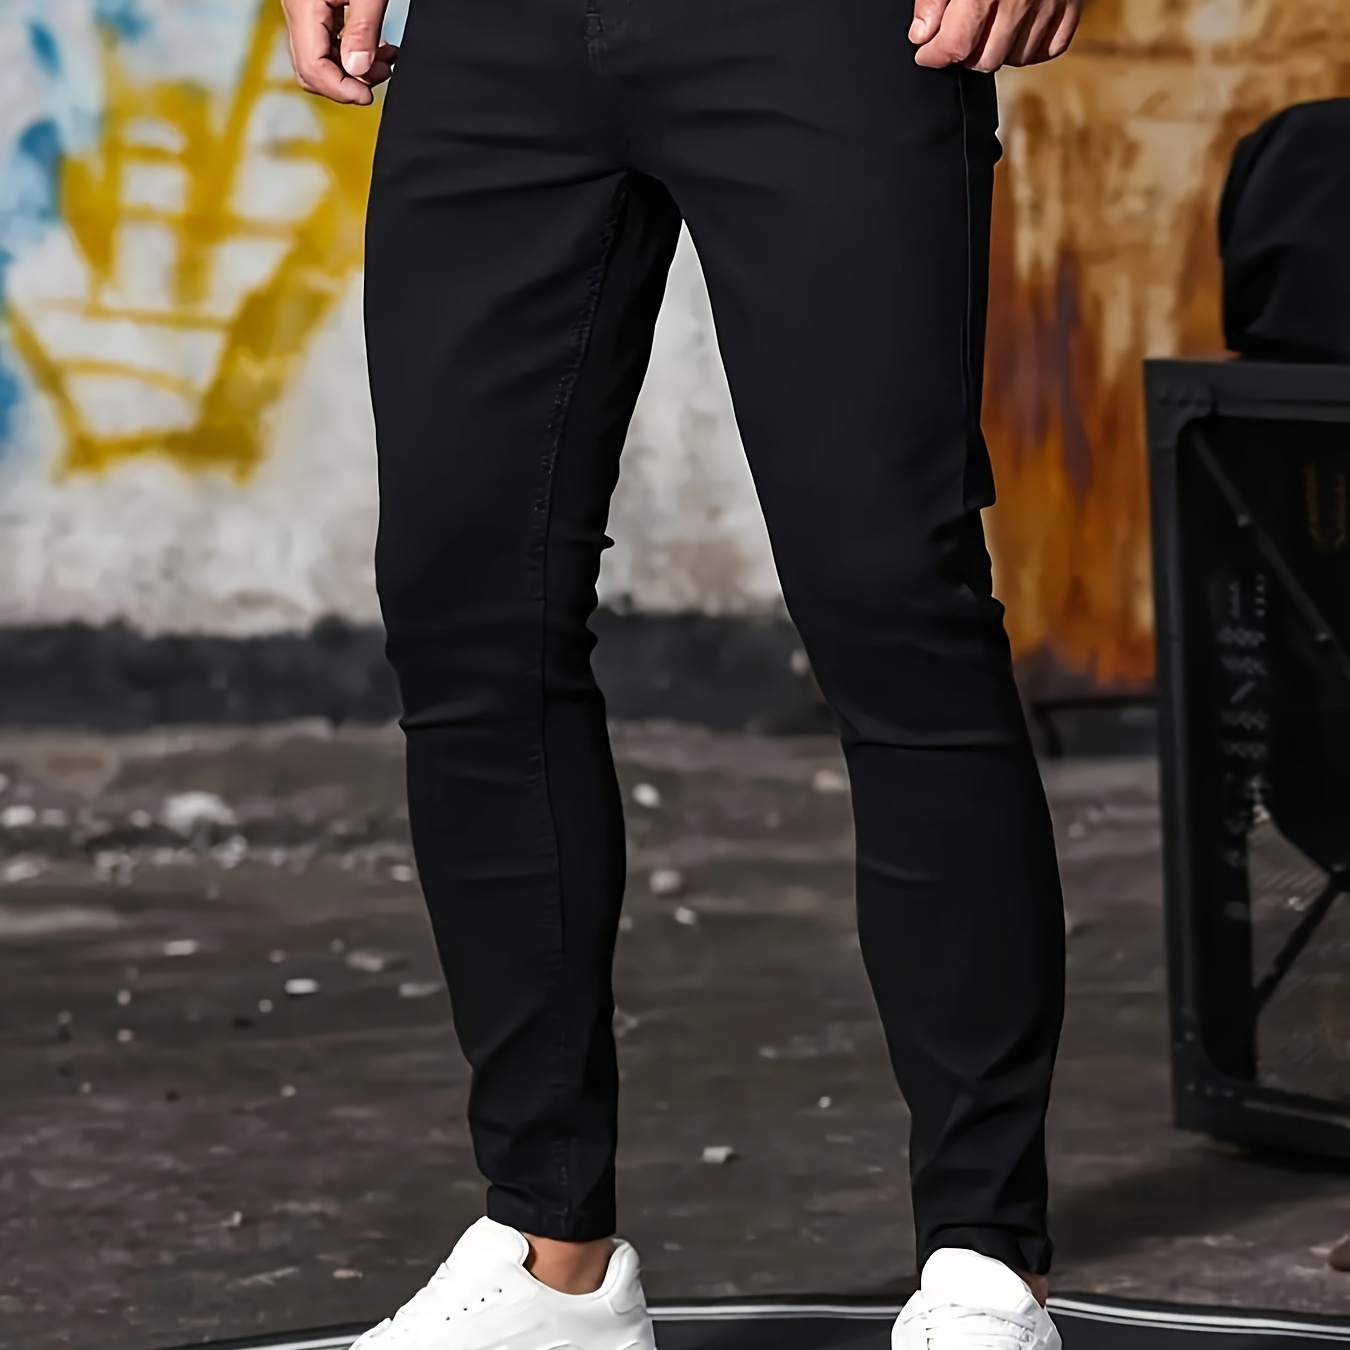 

Solid Slim Fit Denim Pants For Males, Stylish Casual Jeans For Men